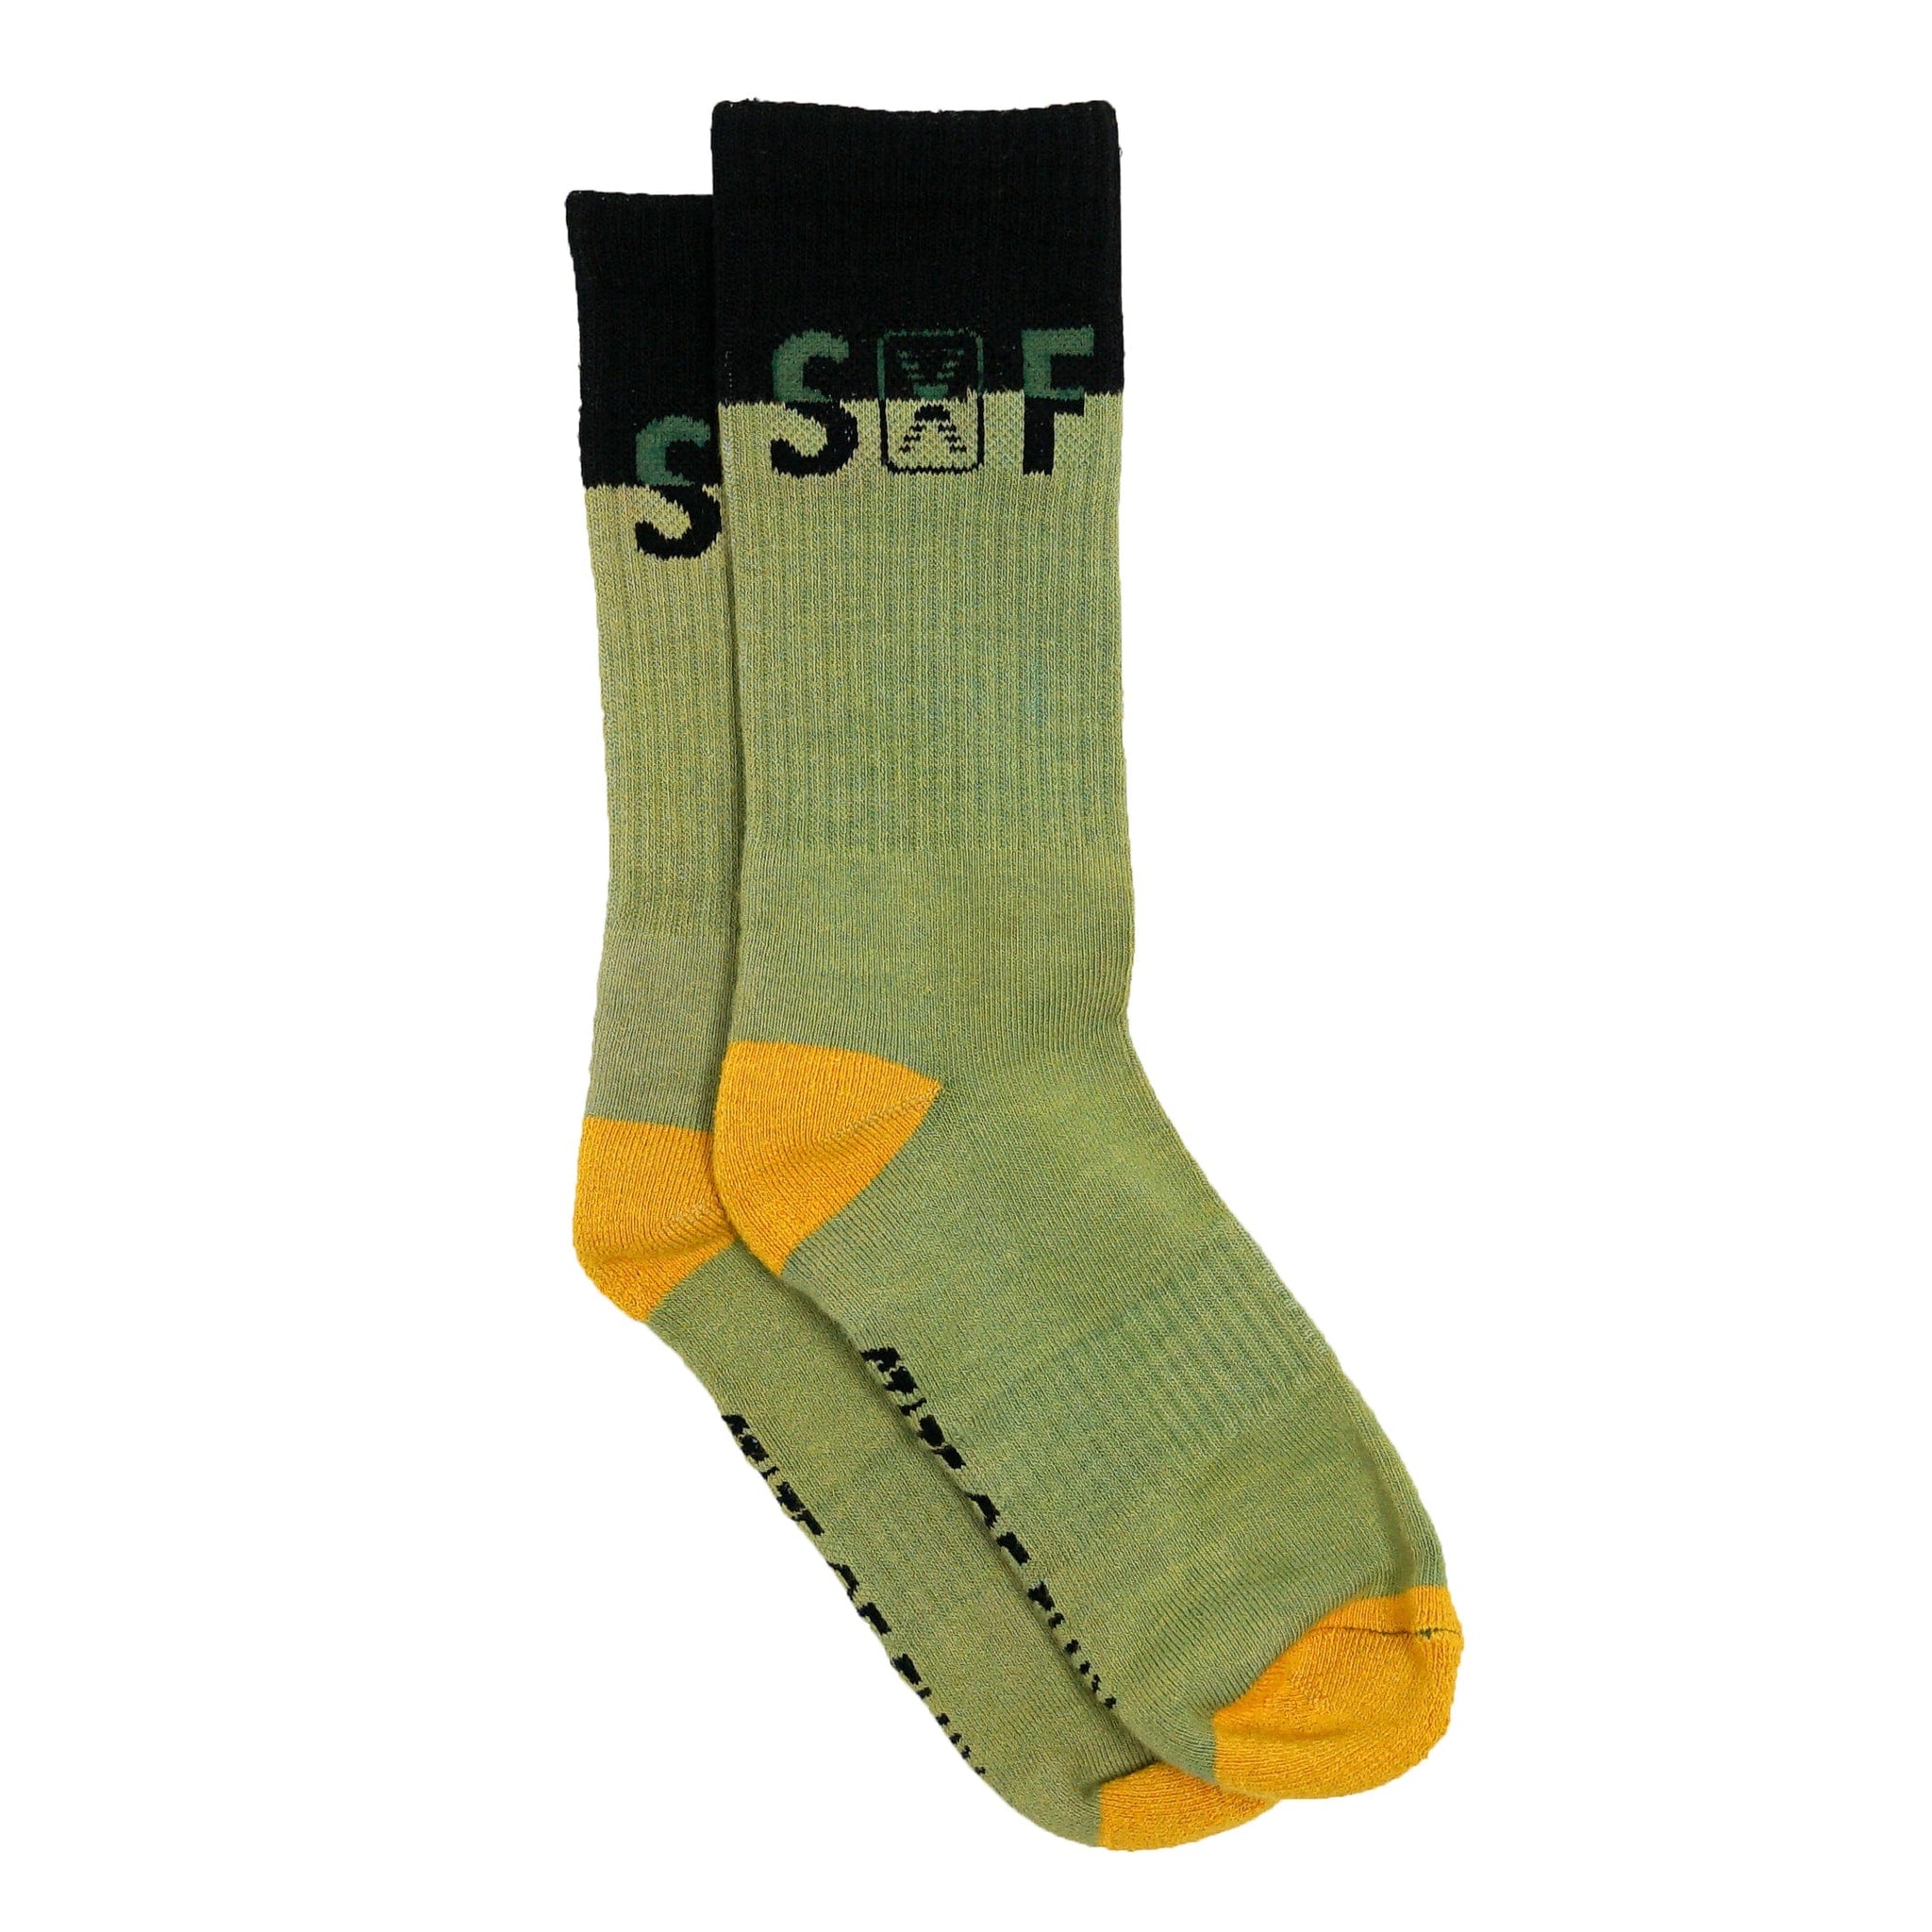 SOF Classic Crew Socks in olive and black